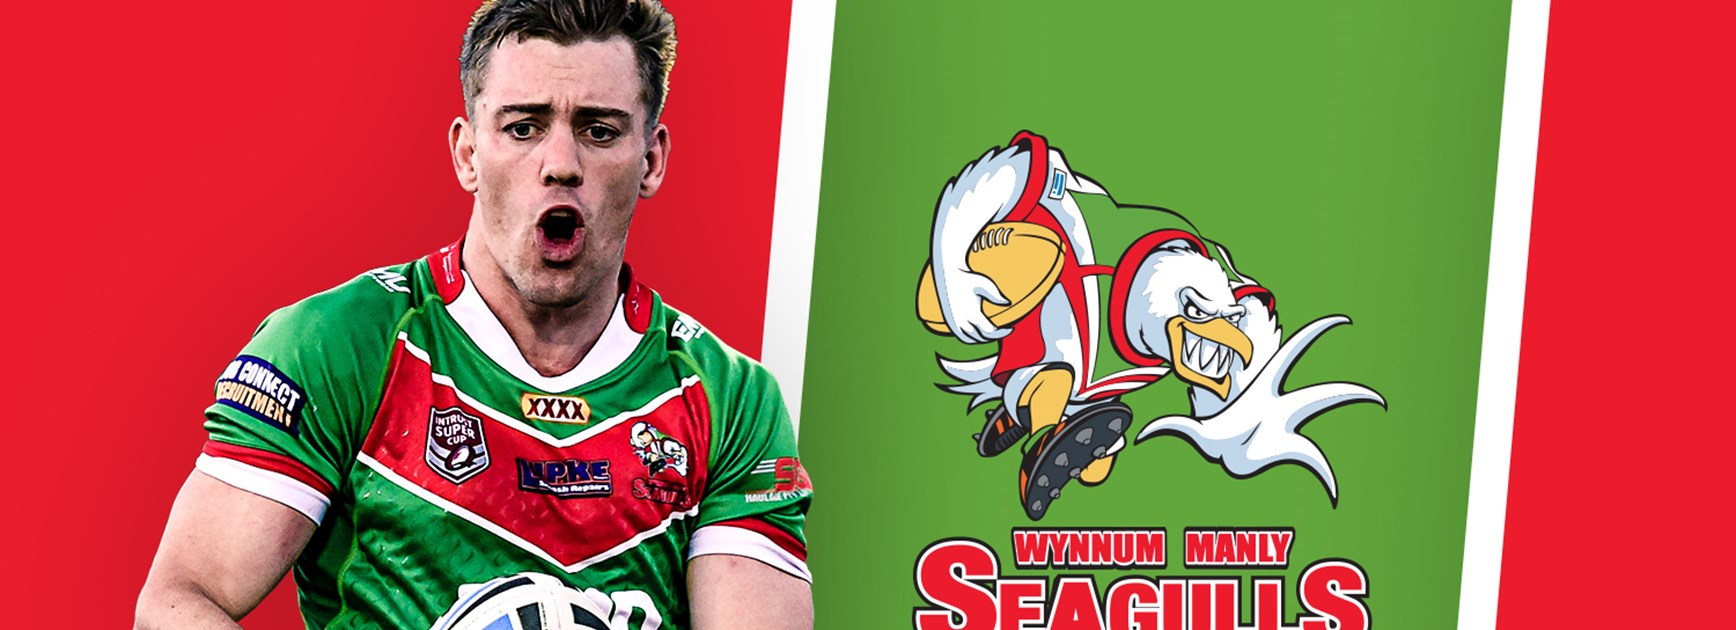 Wynnum Manly Seagulls gains and losses